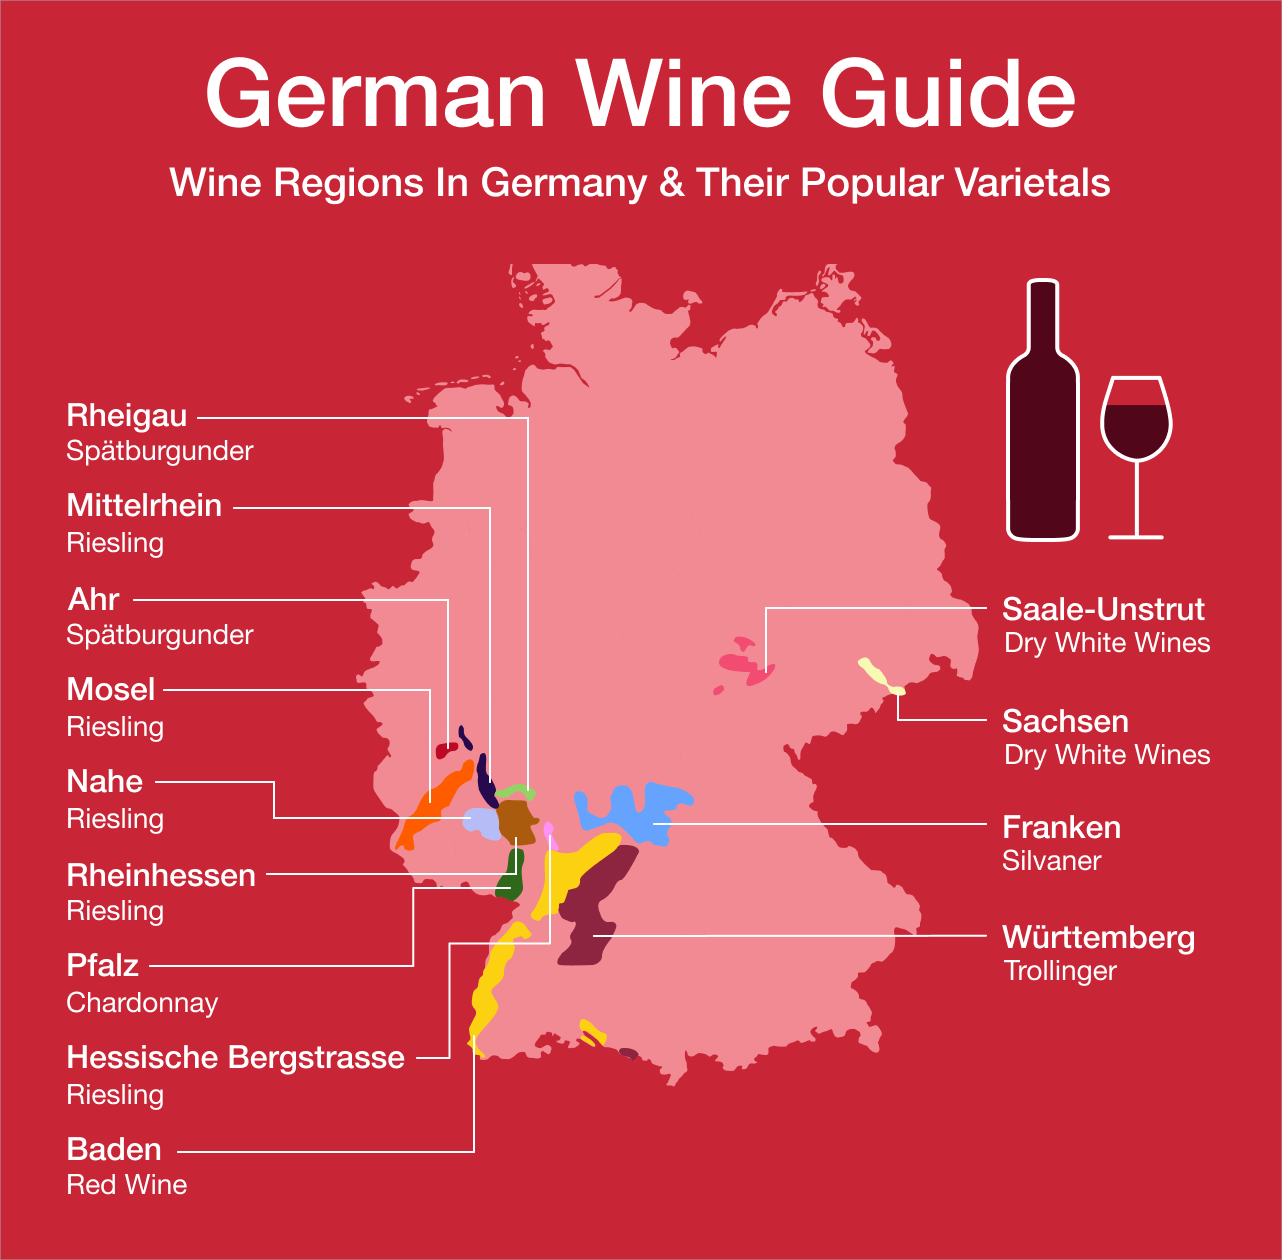 German Wine Guide Infographic